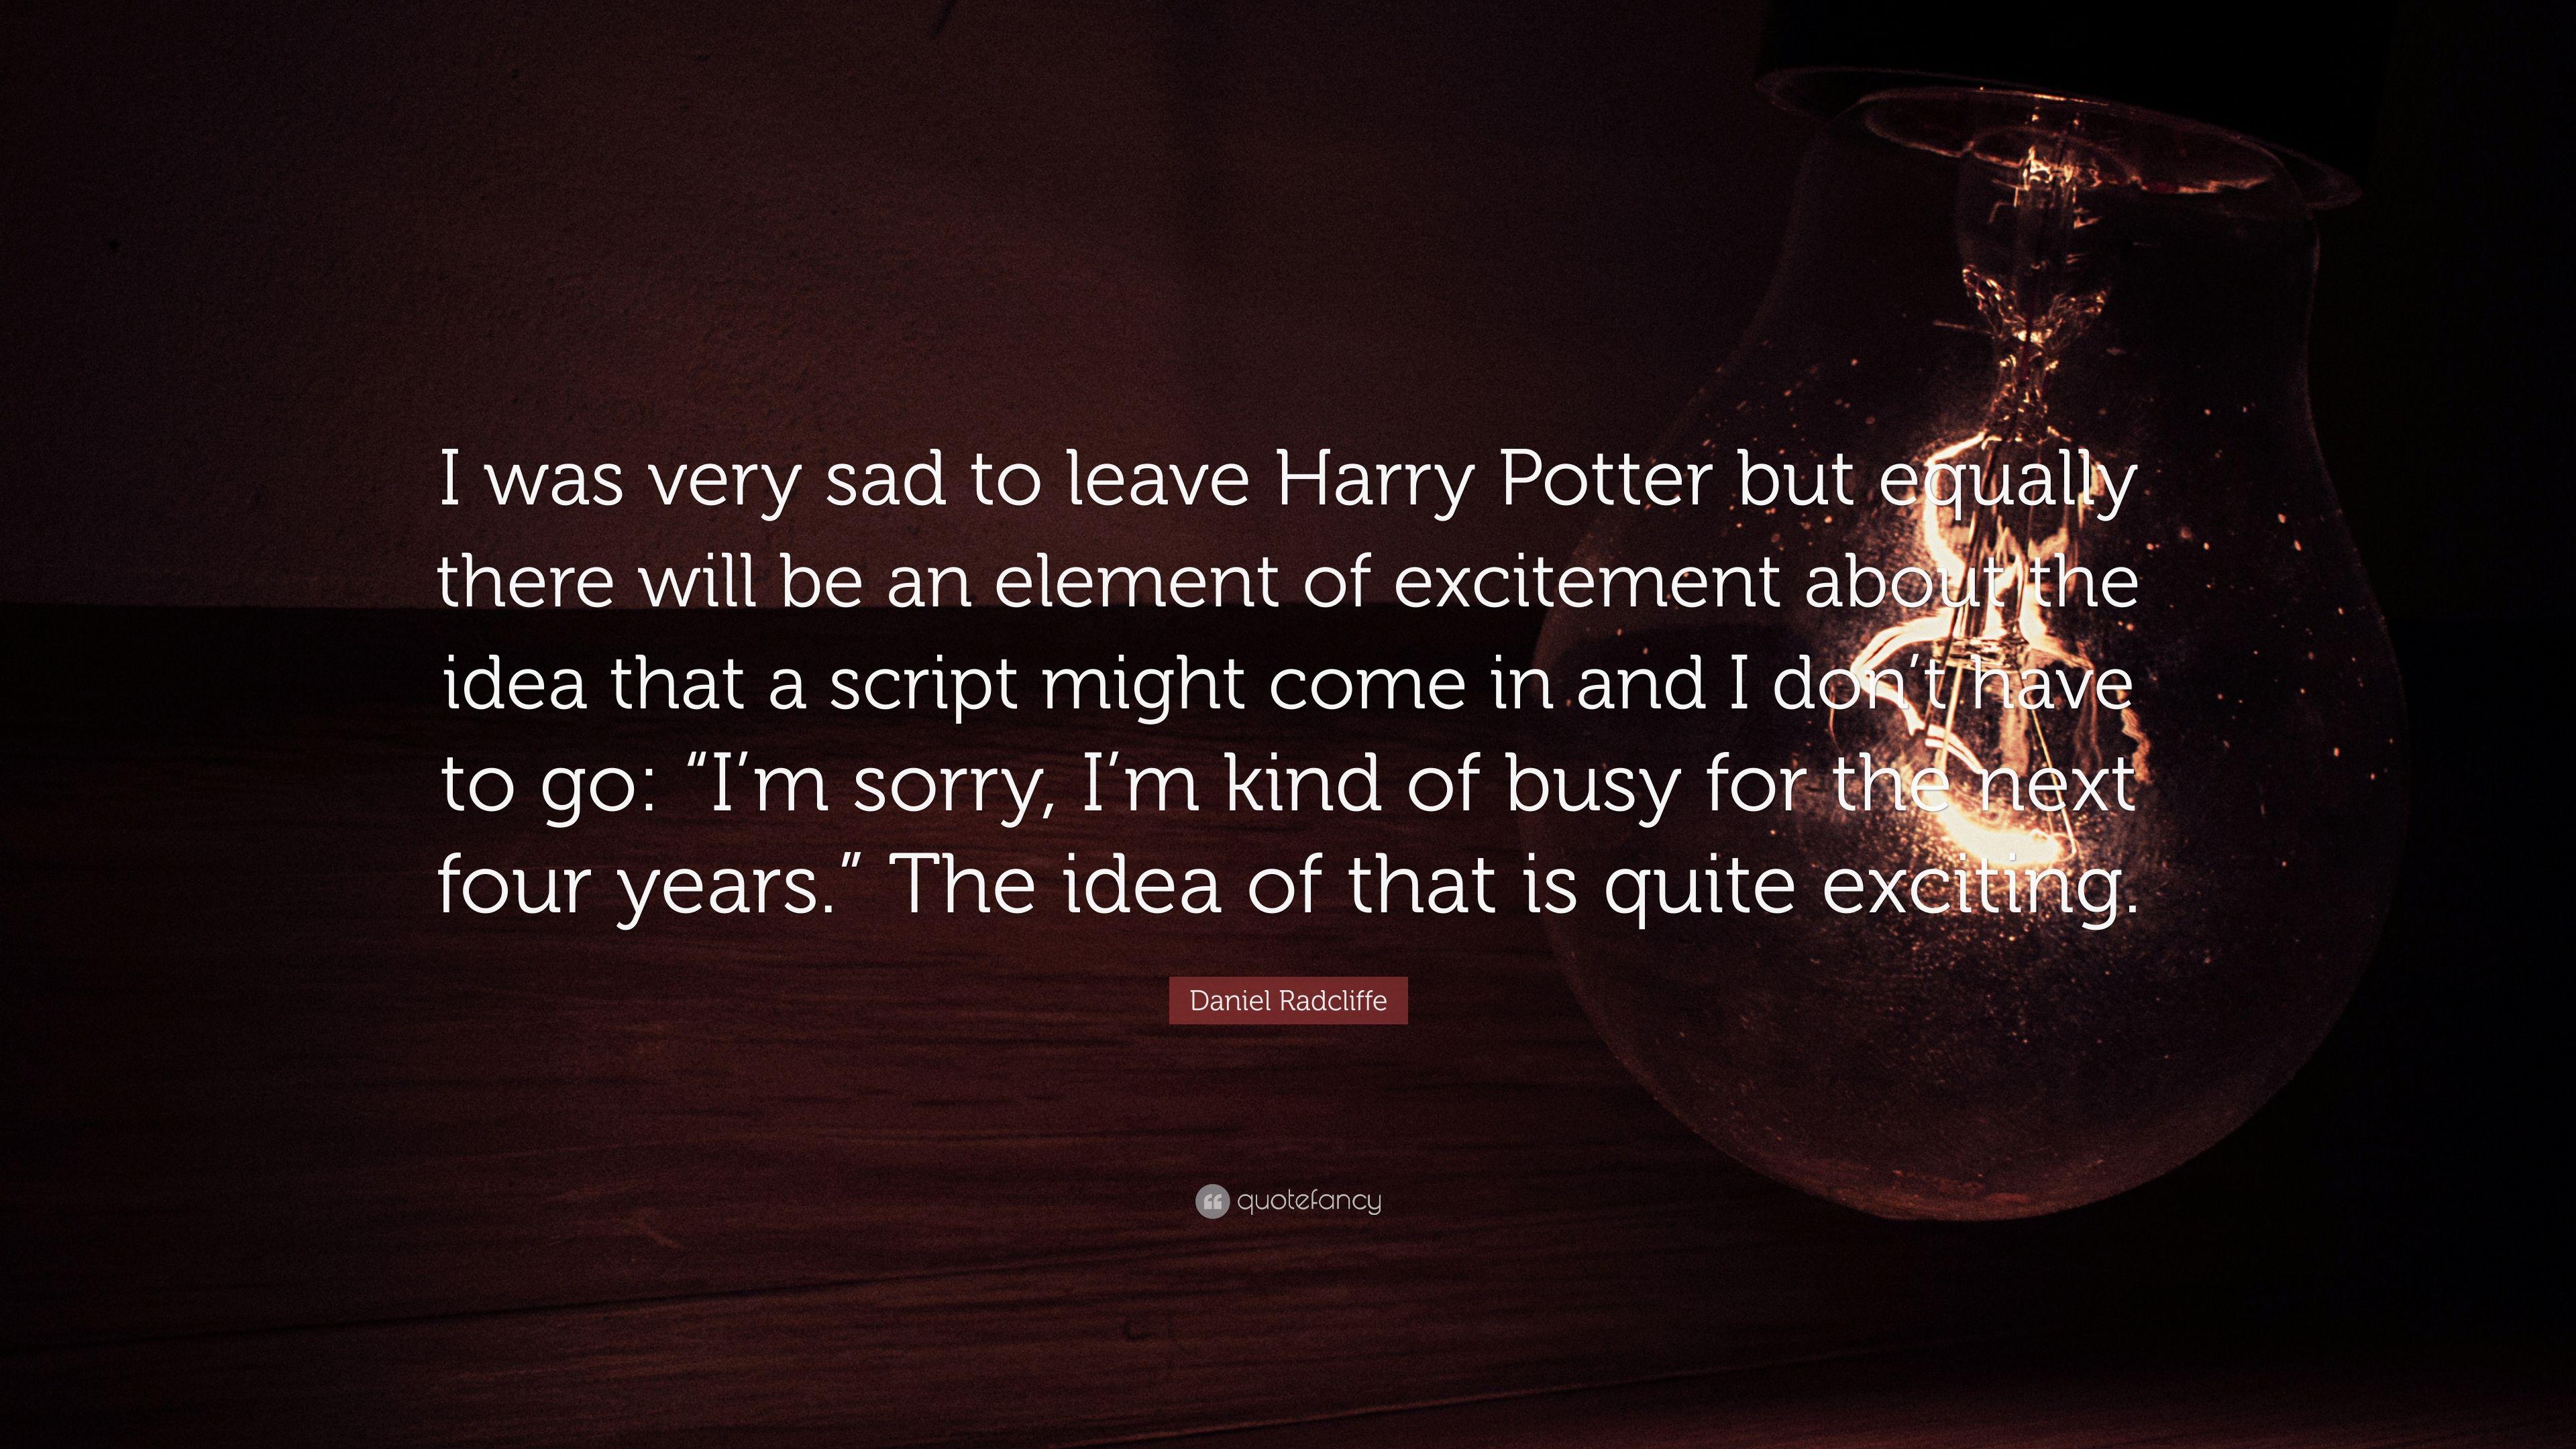 Daniel Radcliffe Quote: “I was very sad to leave Harry Potter but